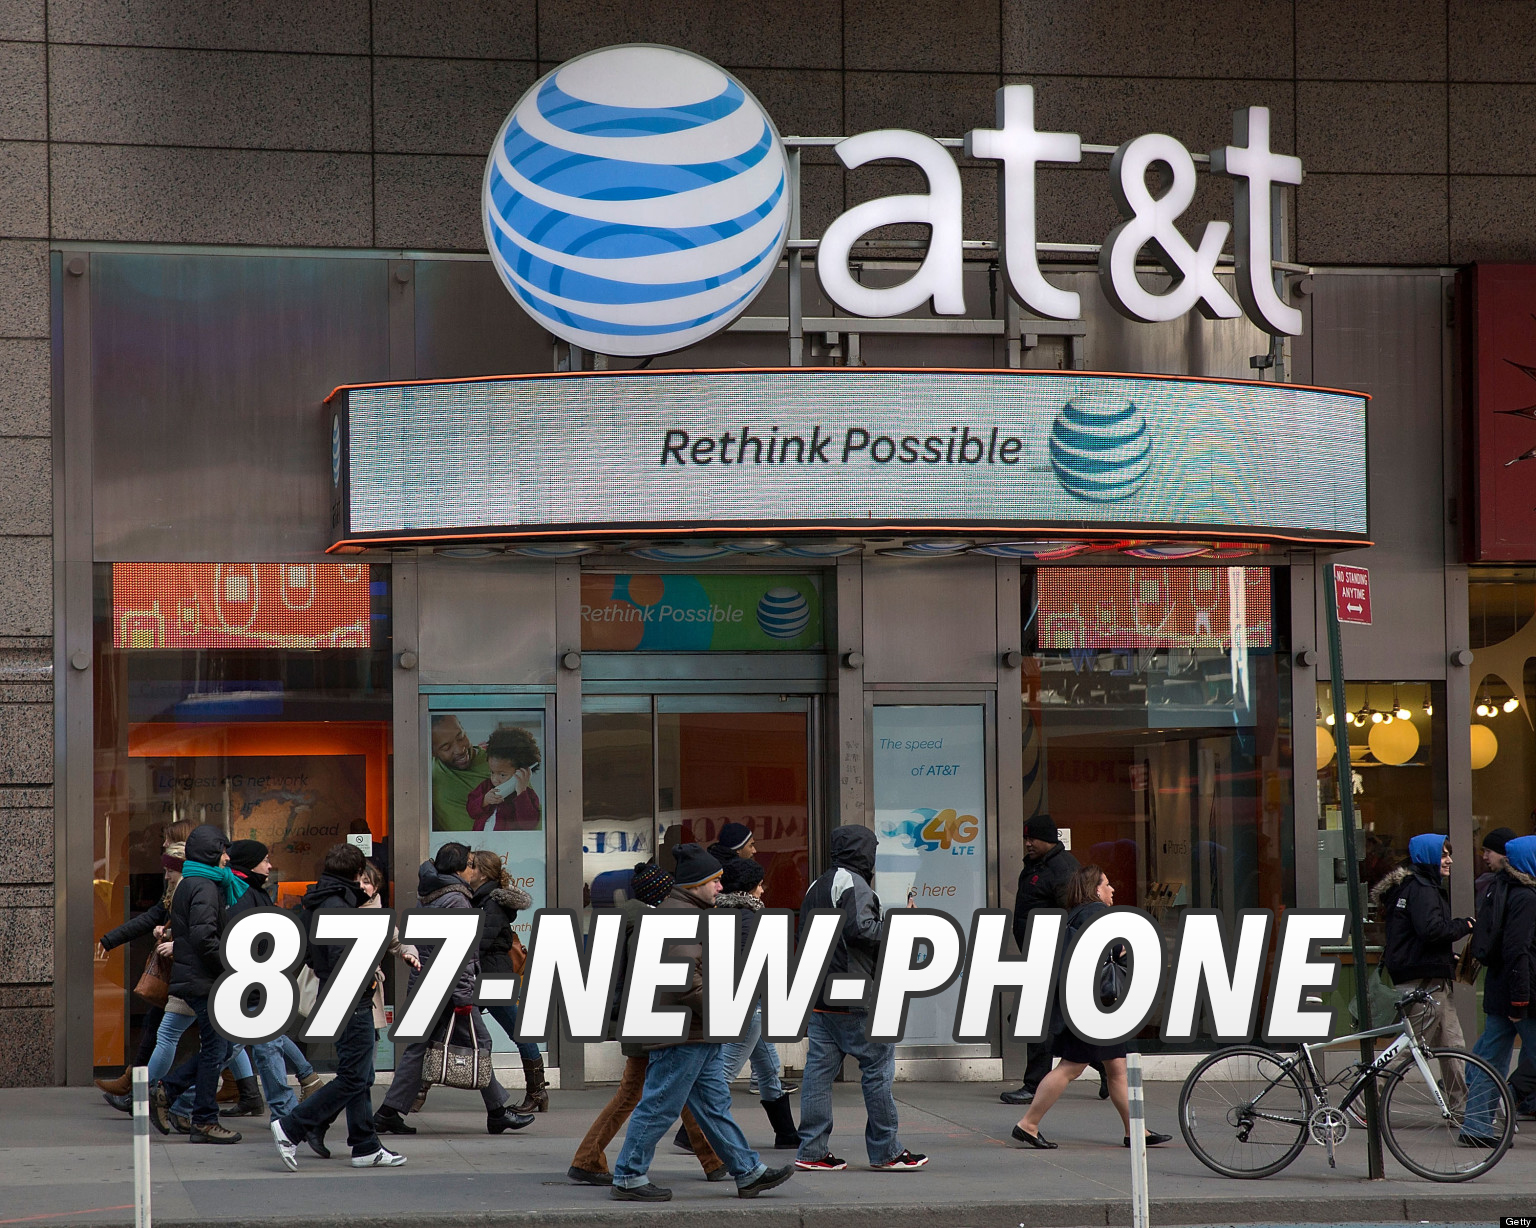 AT&T Building front using 1-877-NEW-PHONE